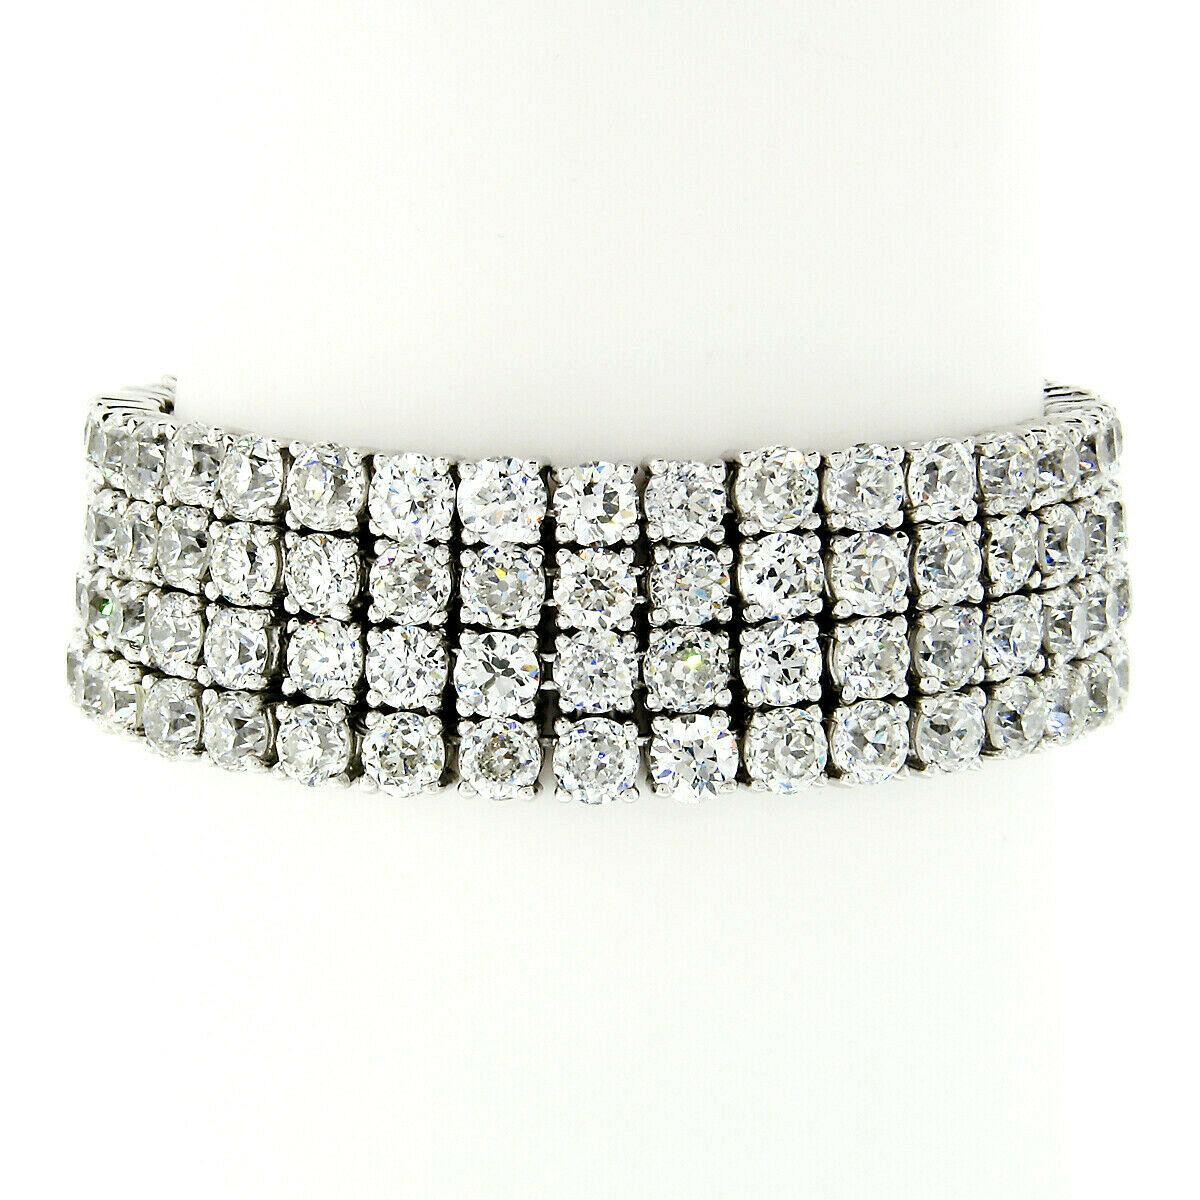 Here we have an absolutely magnificent antique diamond tennis bracelet that was hand-crafted from solid .950 platinum during the late art deco period. Each diamond was mounted in its own handmade 4-prong basket which was then linked to 3 others to